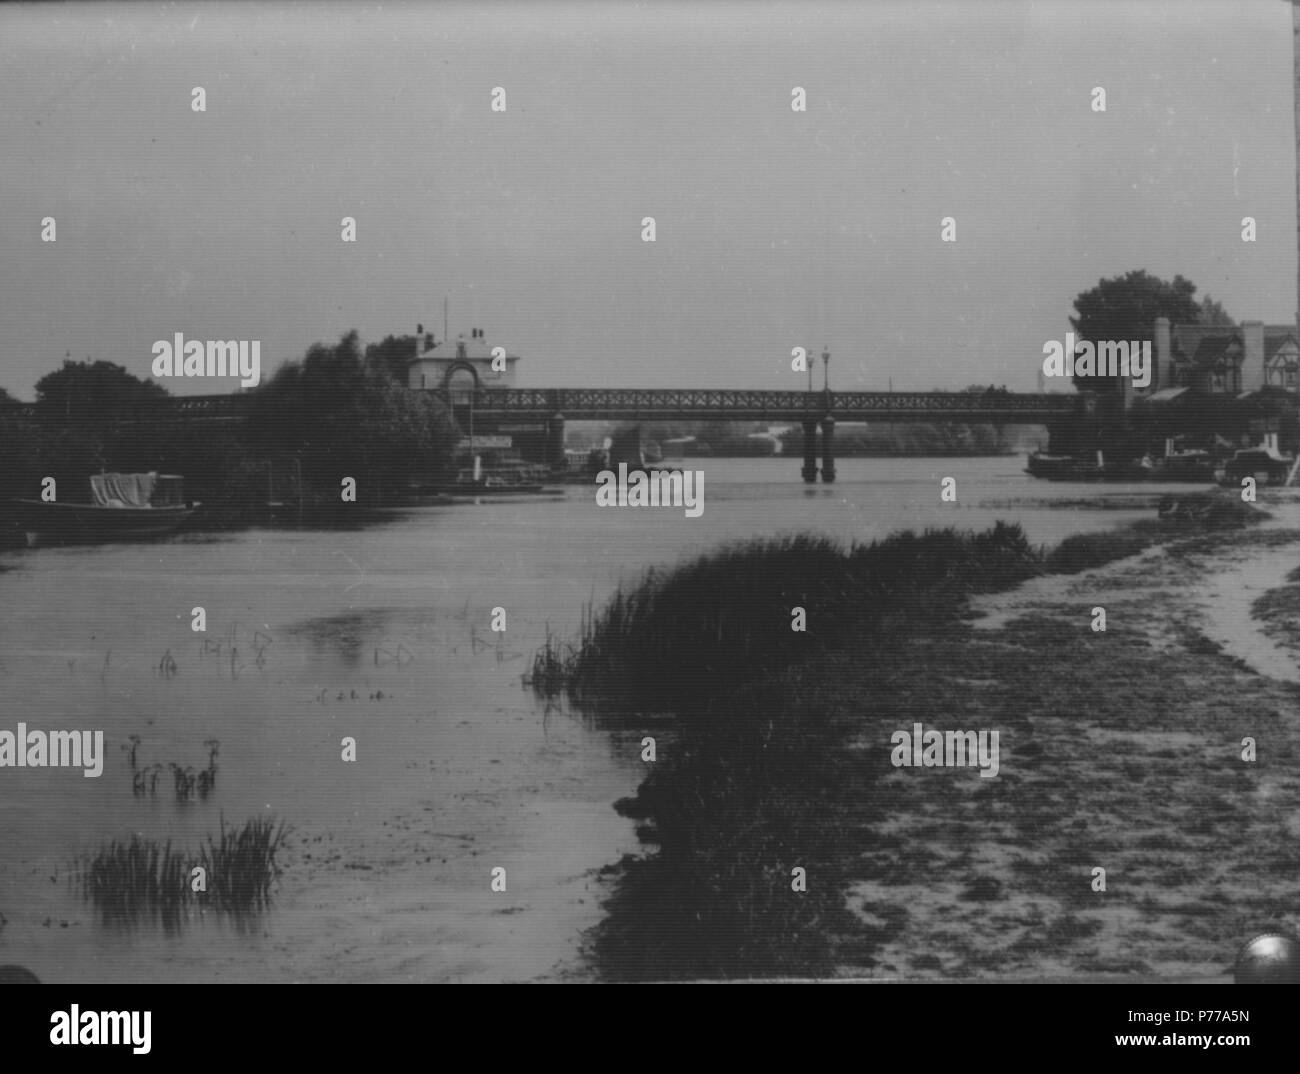 English: Caversham Bridge, Reading, from upstream, c. 1900. The waterman's house appears behind the bridge, and there is a large advertising sign for Salter's boats on the island. Bona's Caversham Bridge Hotel is to the right, with several steam launches moored by it. 1900-1909 : glass negative by H. W. Taunt, [numbered 8818], Box 21, un-numbered 3. 1900 15 Caversham Bridge, c. 1900 Stock Photo